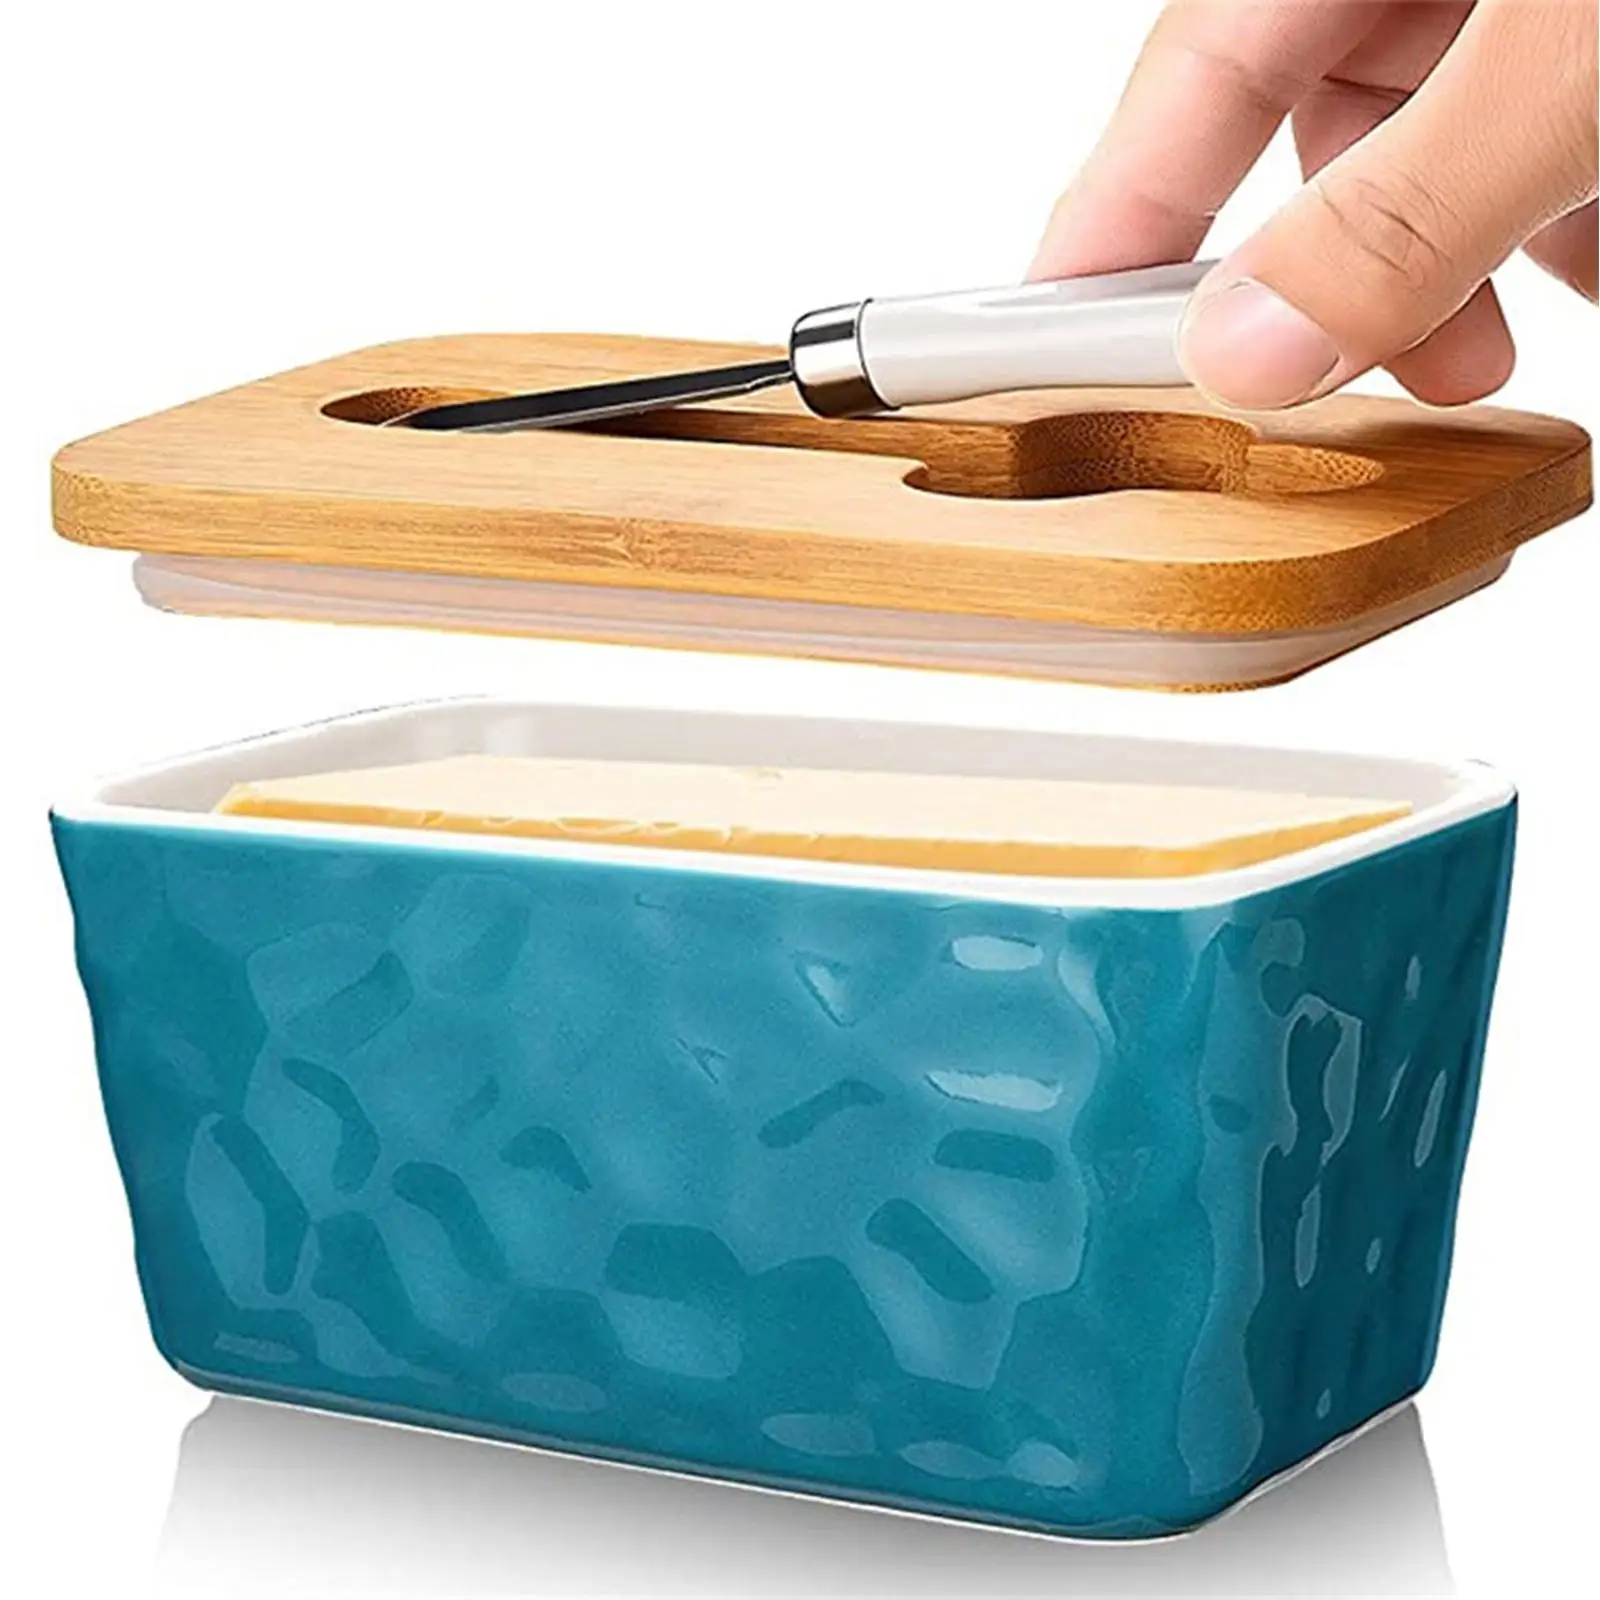 Multifunctional Butter Dish Sealing Dish Tray Butter Keeper for Biscuits